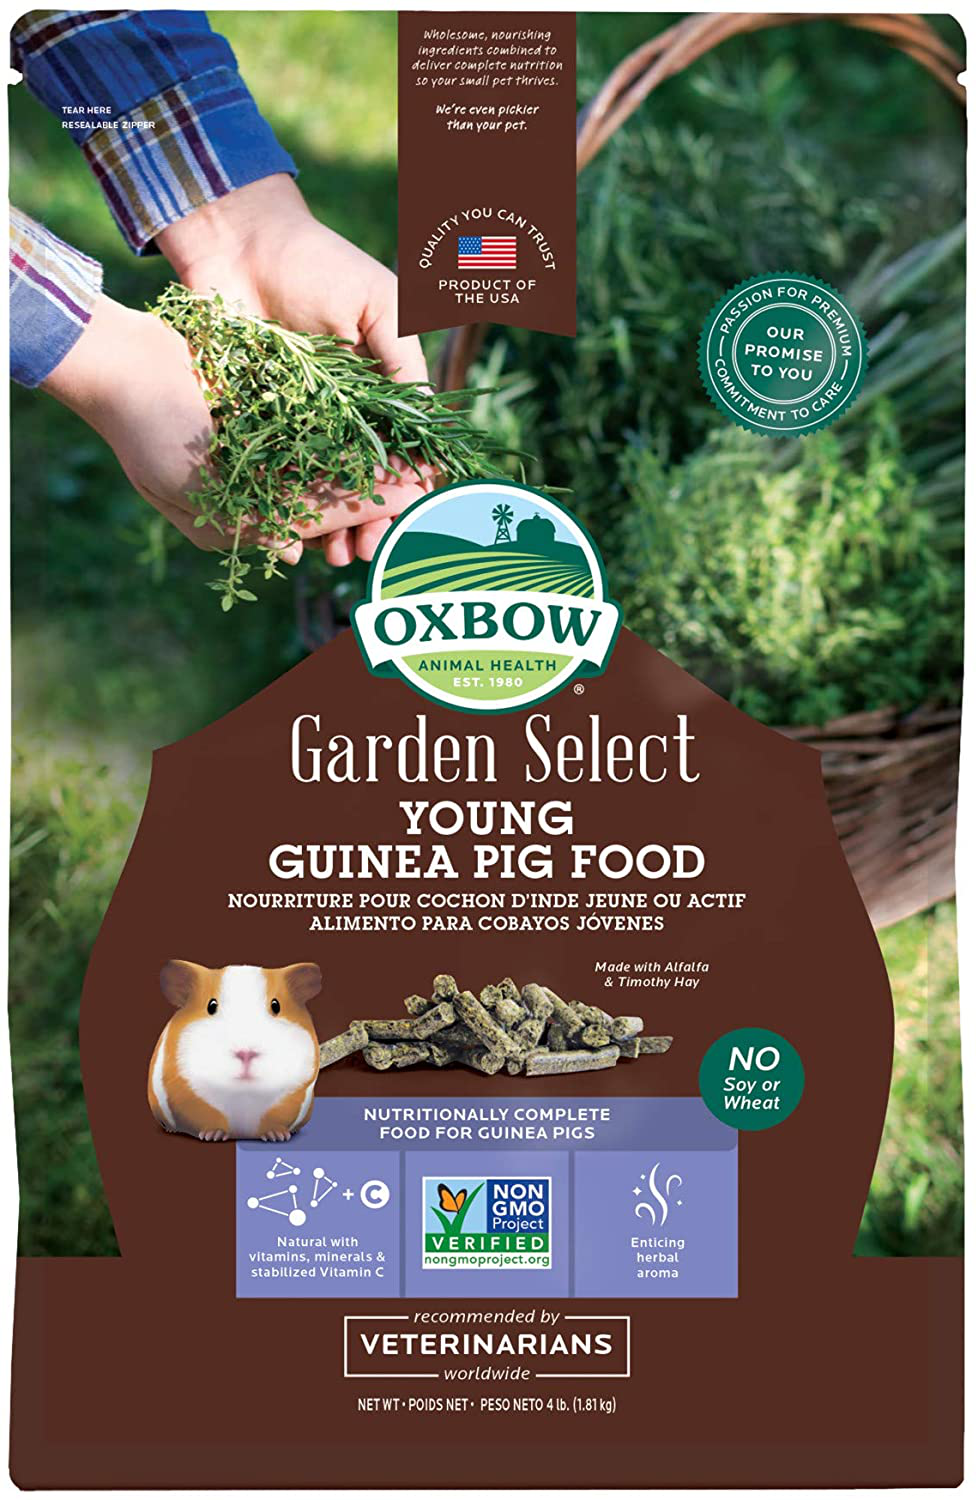 Oxbow Animal Health Garden Select Young Guinea Pig Food, Garden-Inspired Recipe for Young Guinea Pigs, No Soy or Wheat, Non-Gmo, Made in the USA, 4 Pound Bag